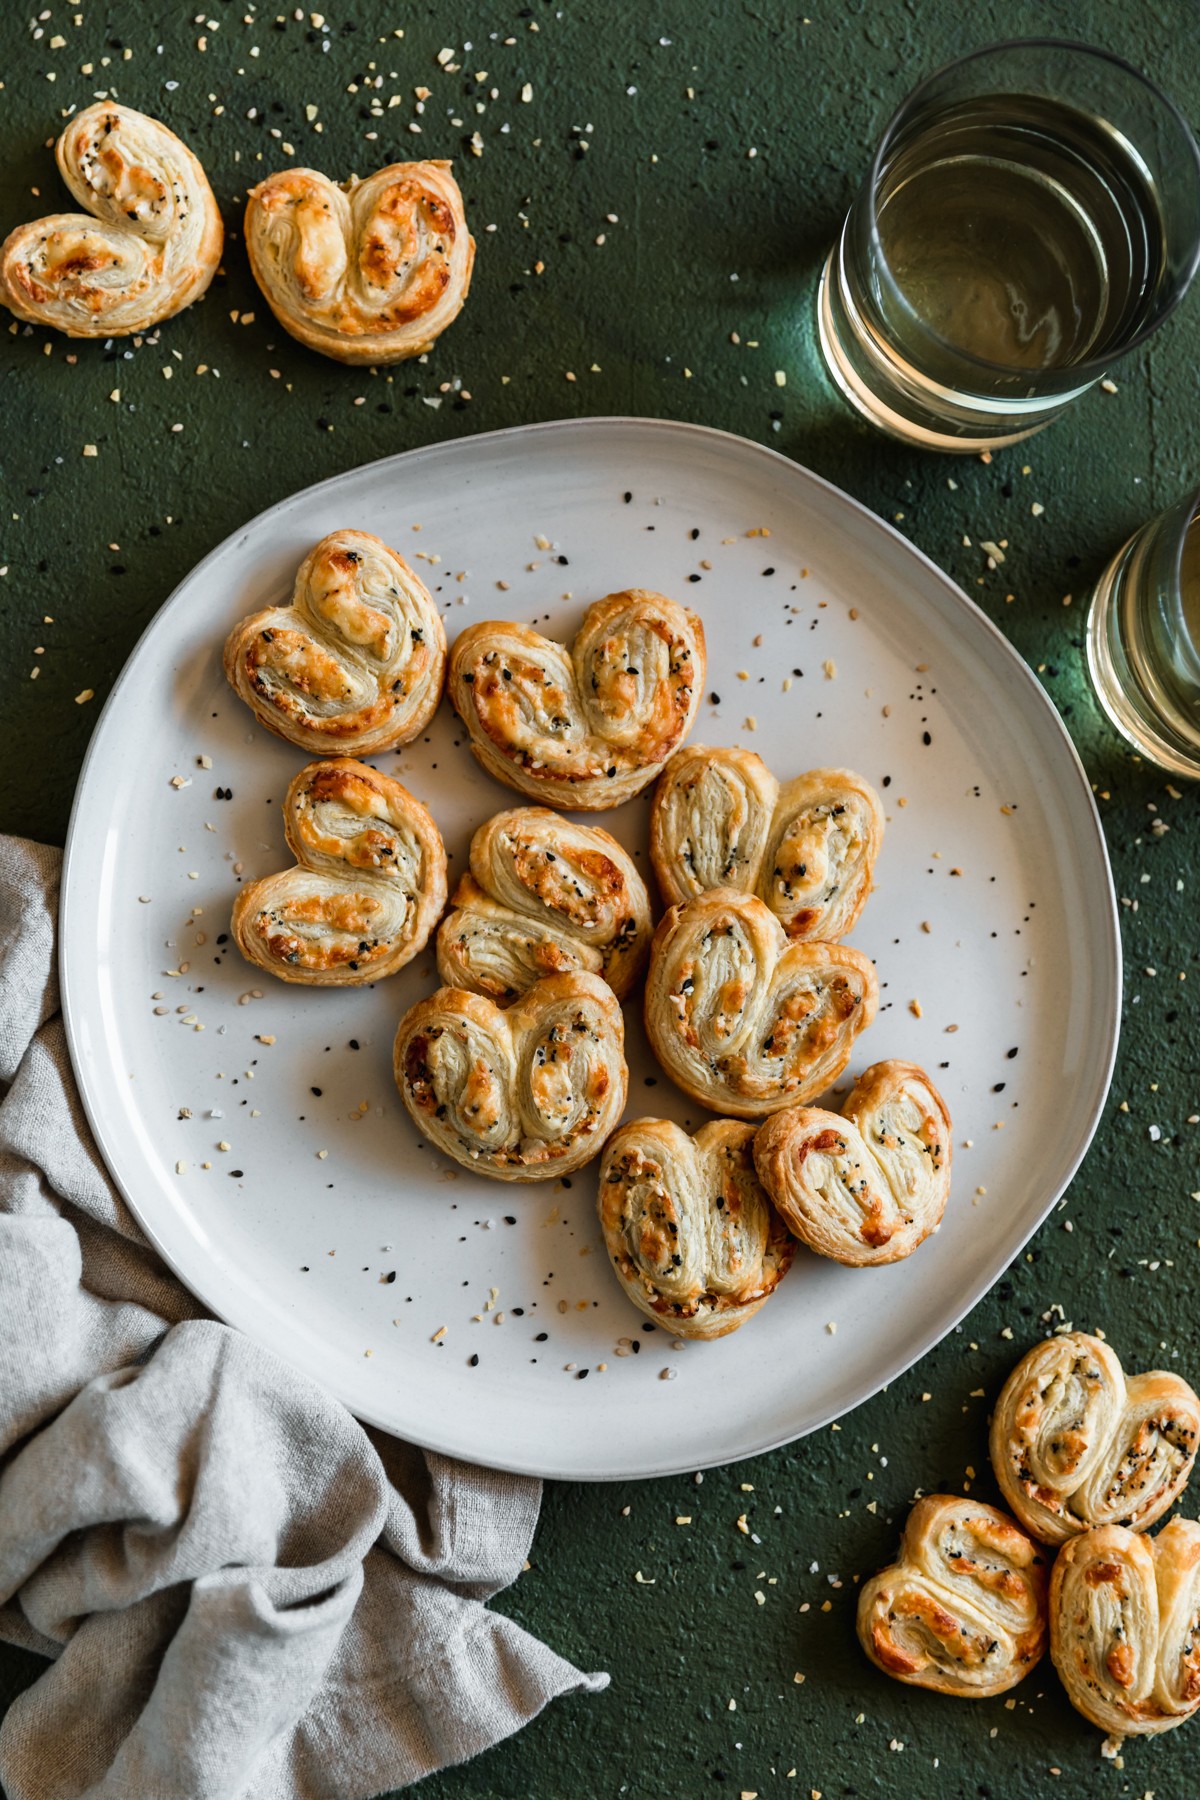 An overhead closeup image of a white plate of savory palmiers with parmesan and everything bagel spice on an emerald green table sprinkled with everything spice. In the right upper corner is two glasses of white wine. The plate is on a beige linen and there are more palmiers in the upper left and bottom right corners.